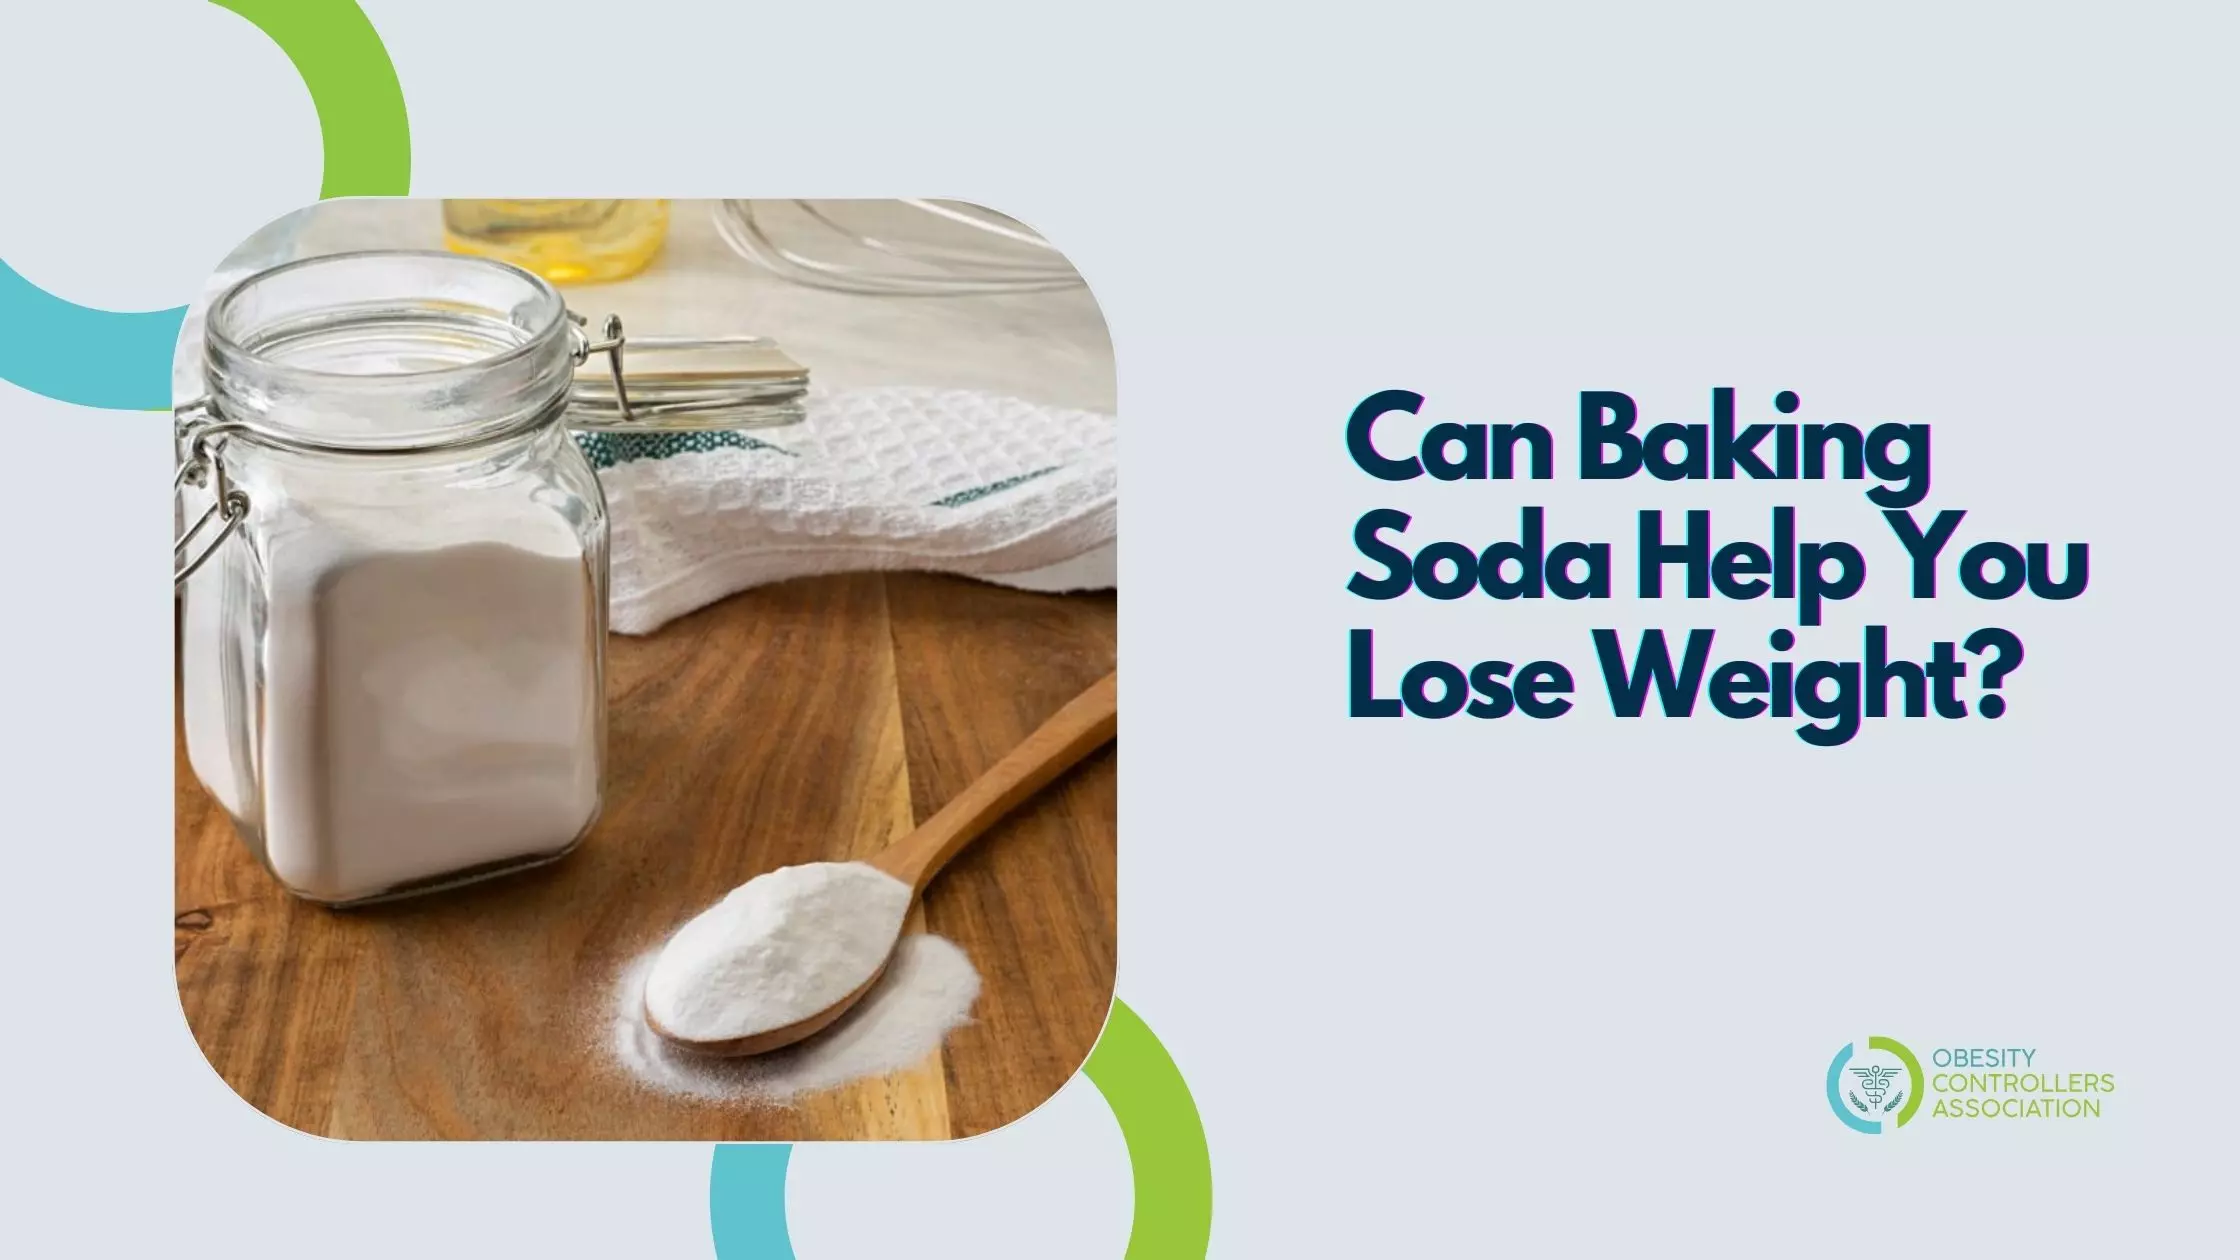 Baking Soda For Weight Loss